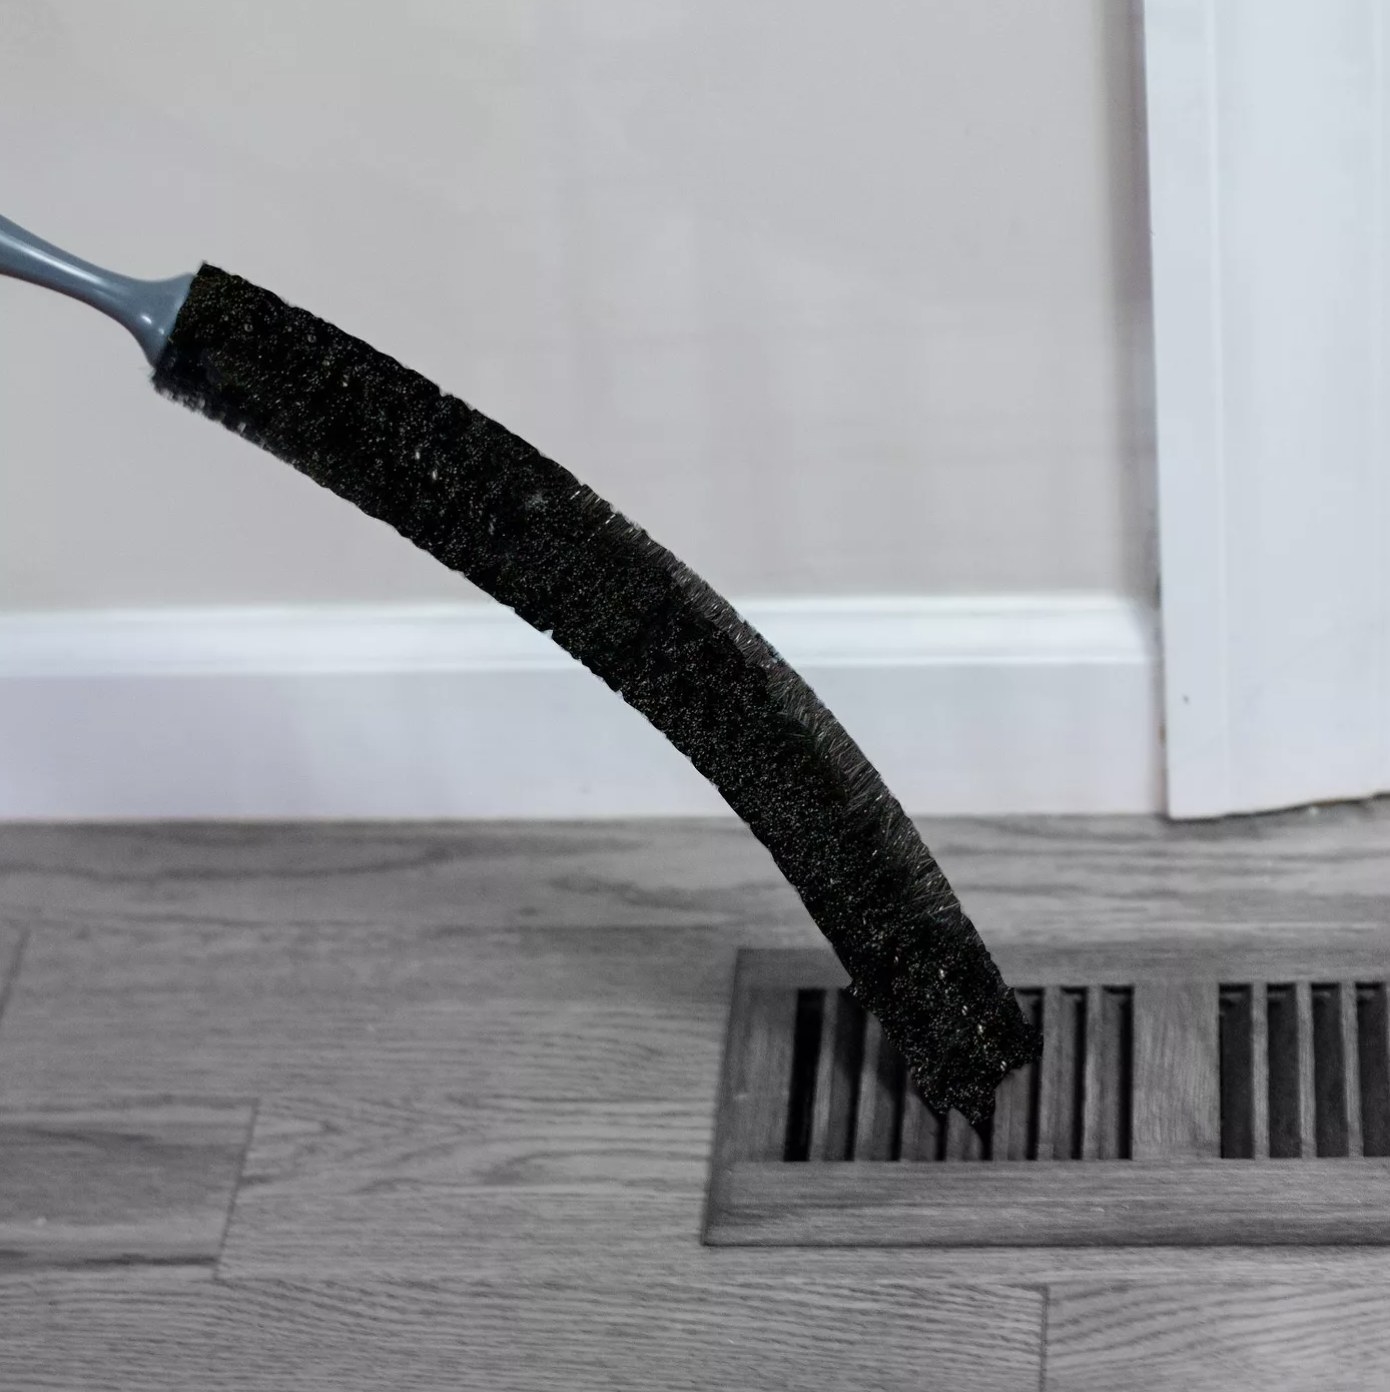 The black brush is angled into a wooden vent on the floor